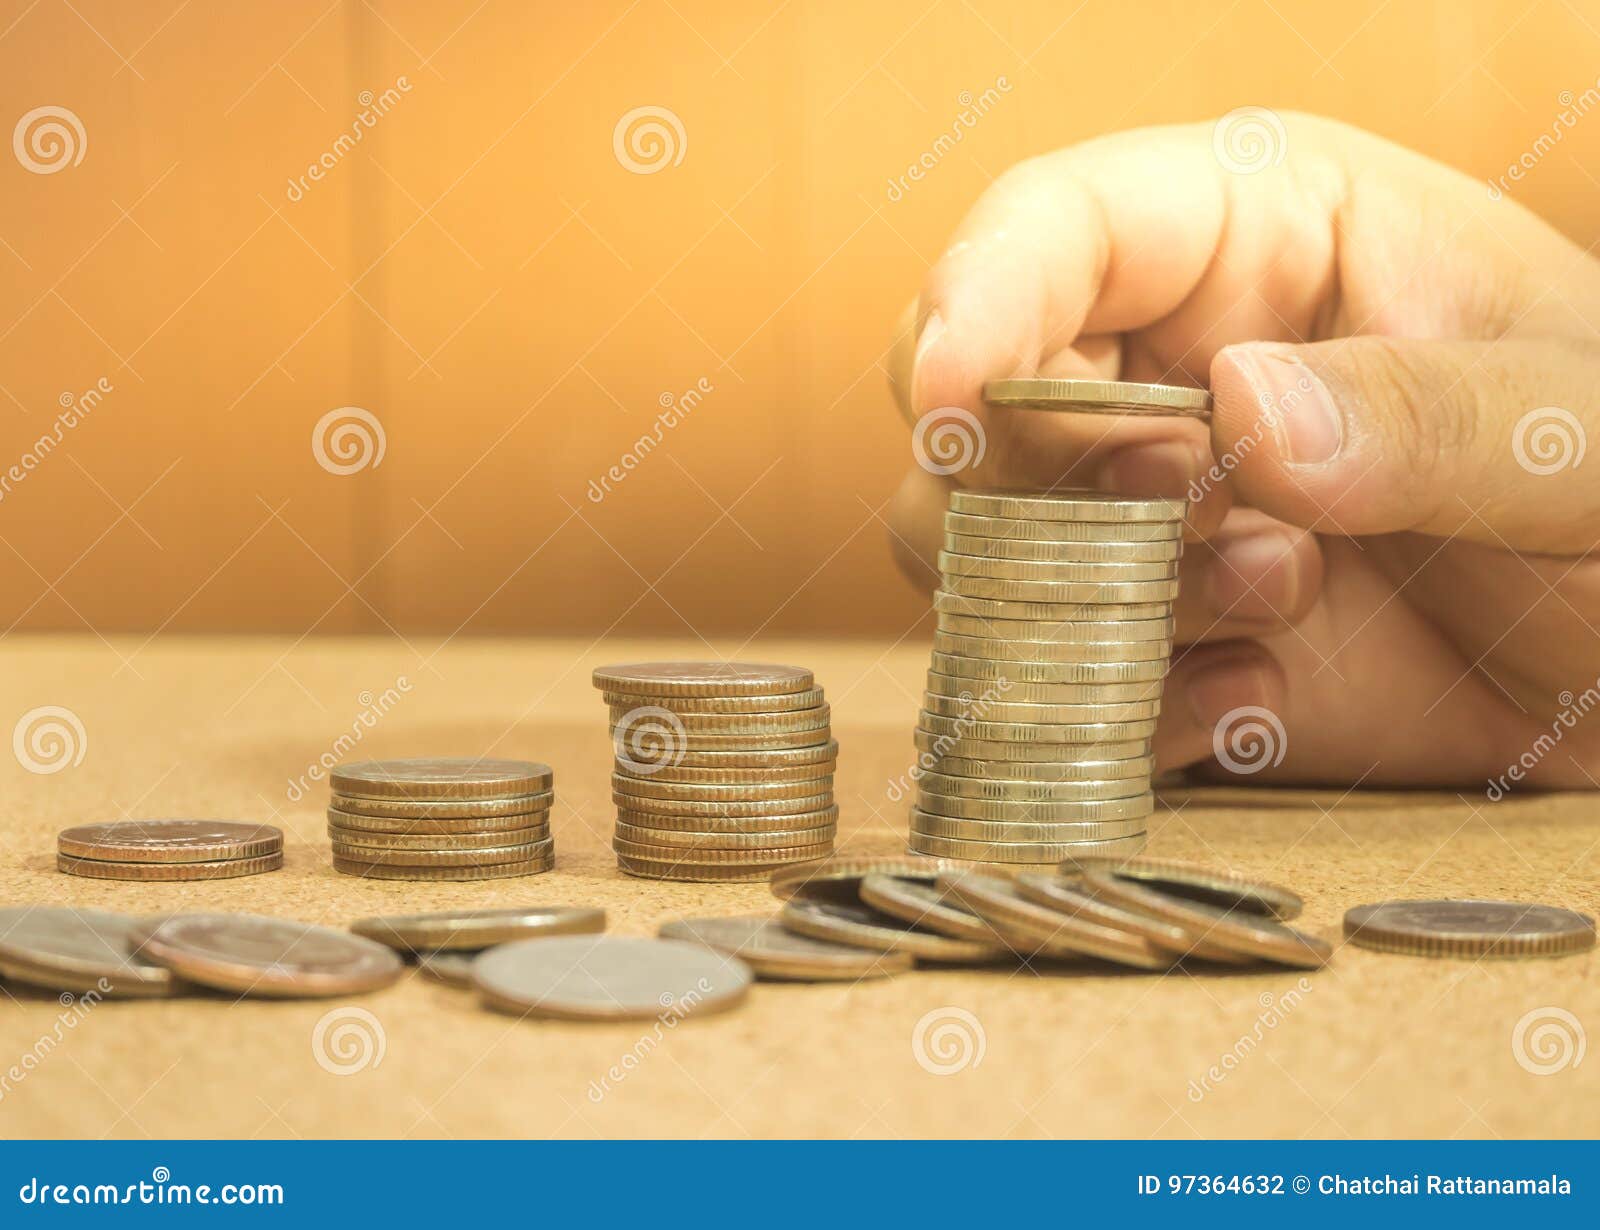 save money concept preset by hand putting money coin stack gro